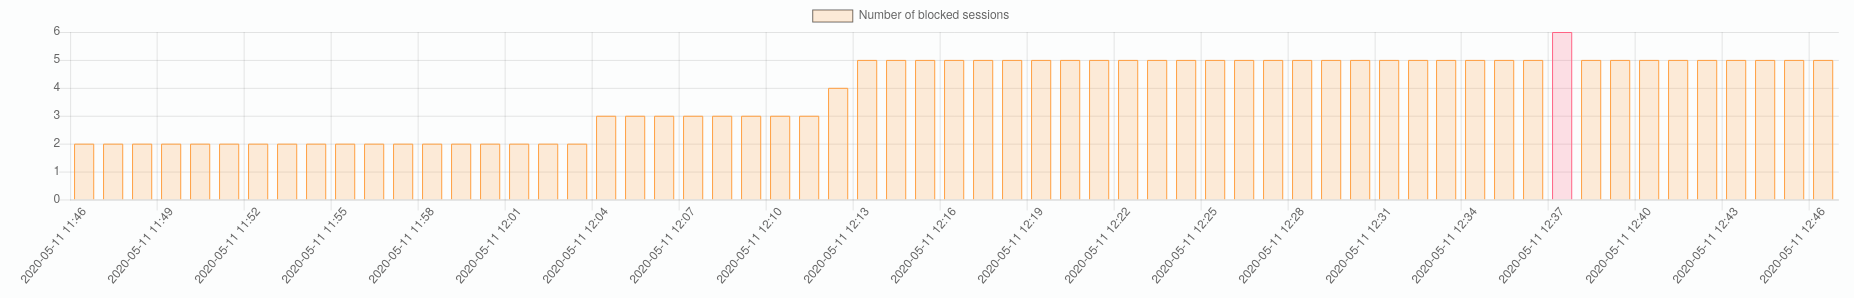 ch3 blocked sessions chart